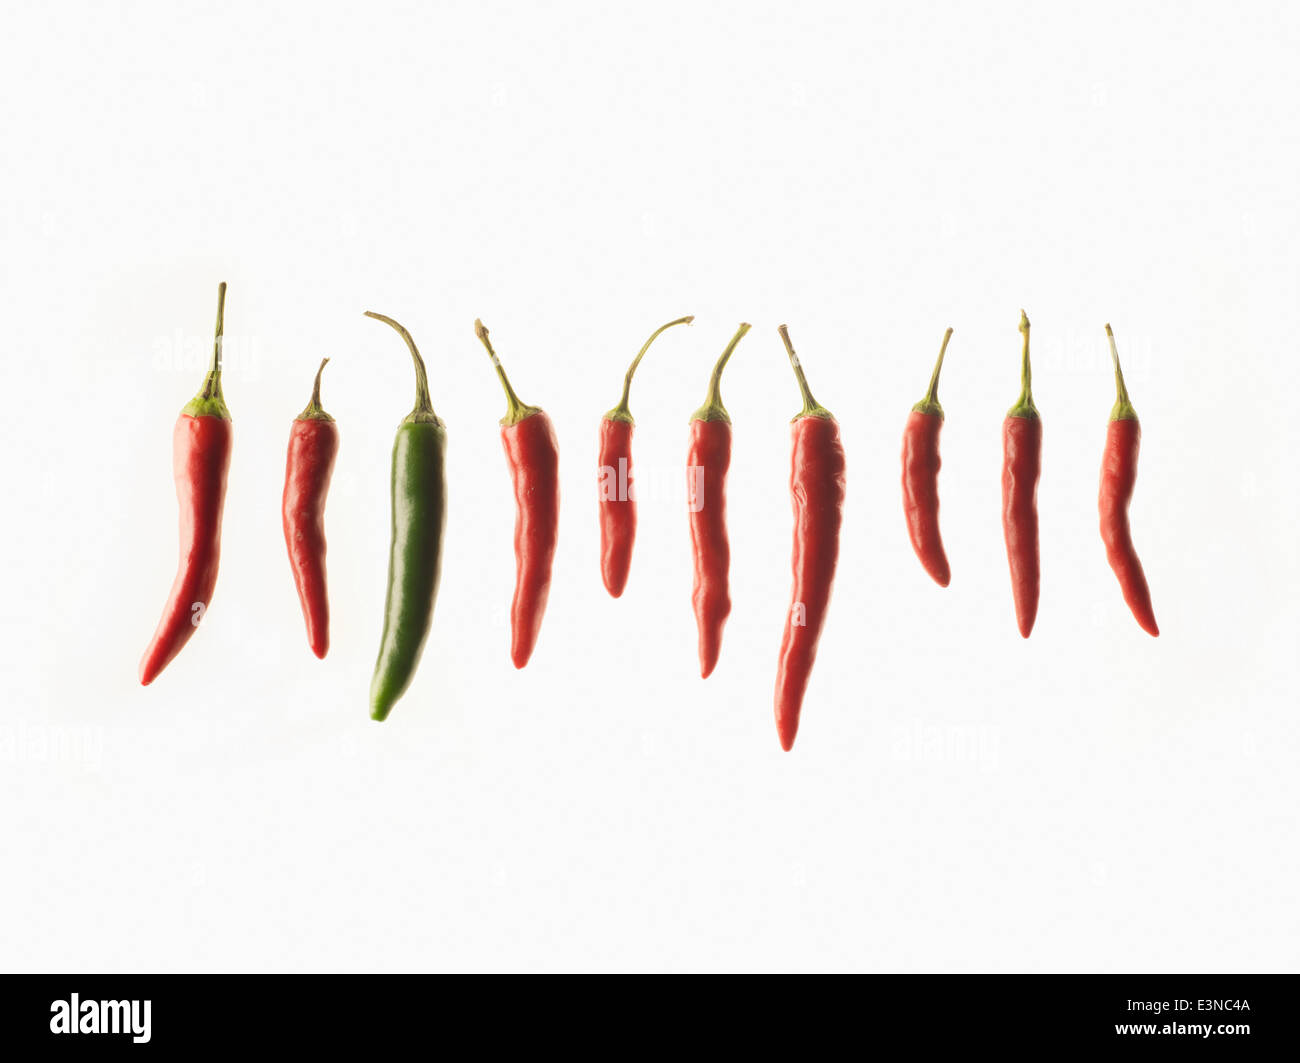 Green chili amidst red chilies over white background Stock Photo